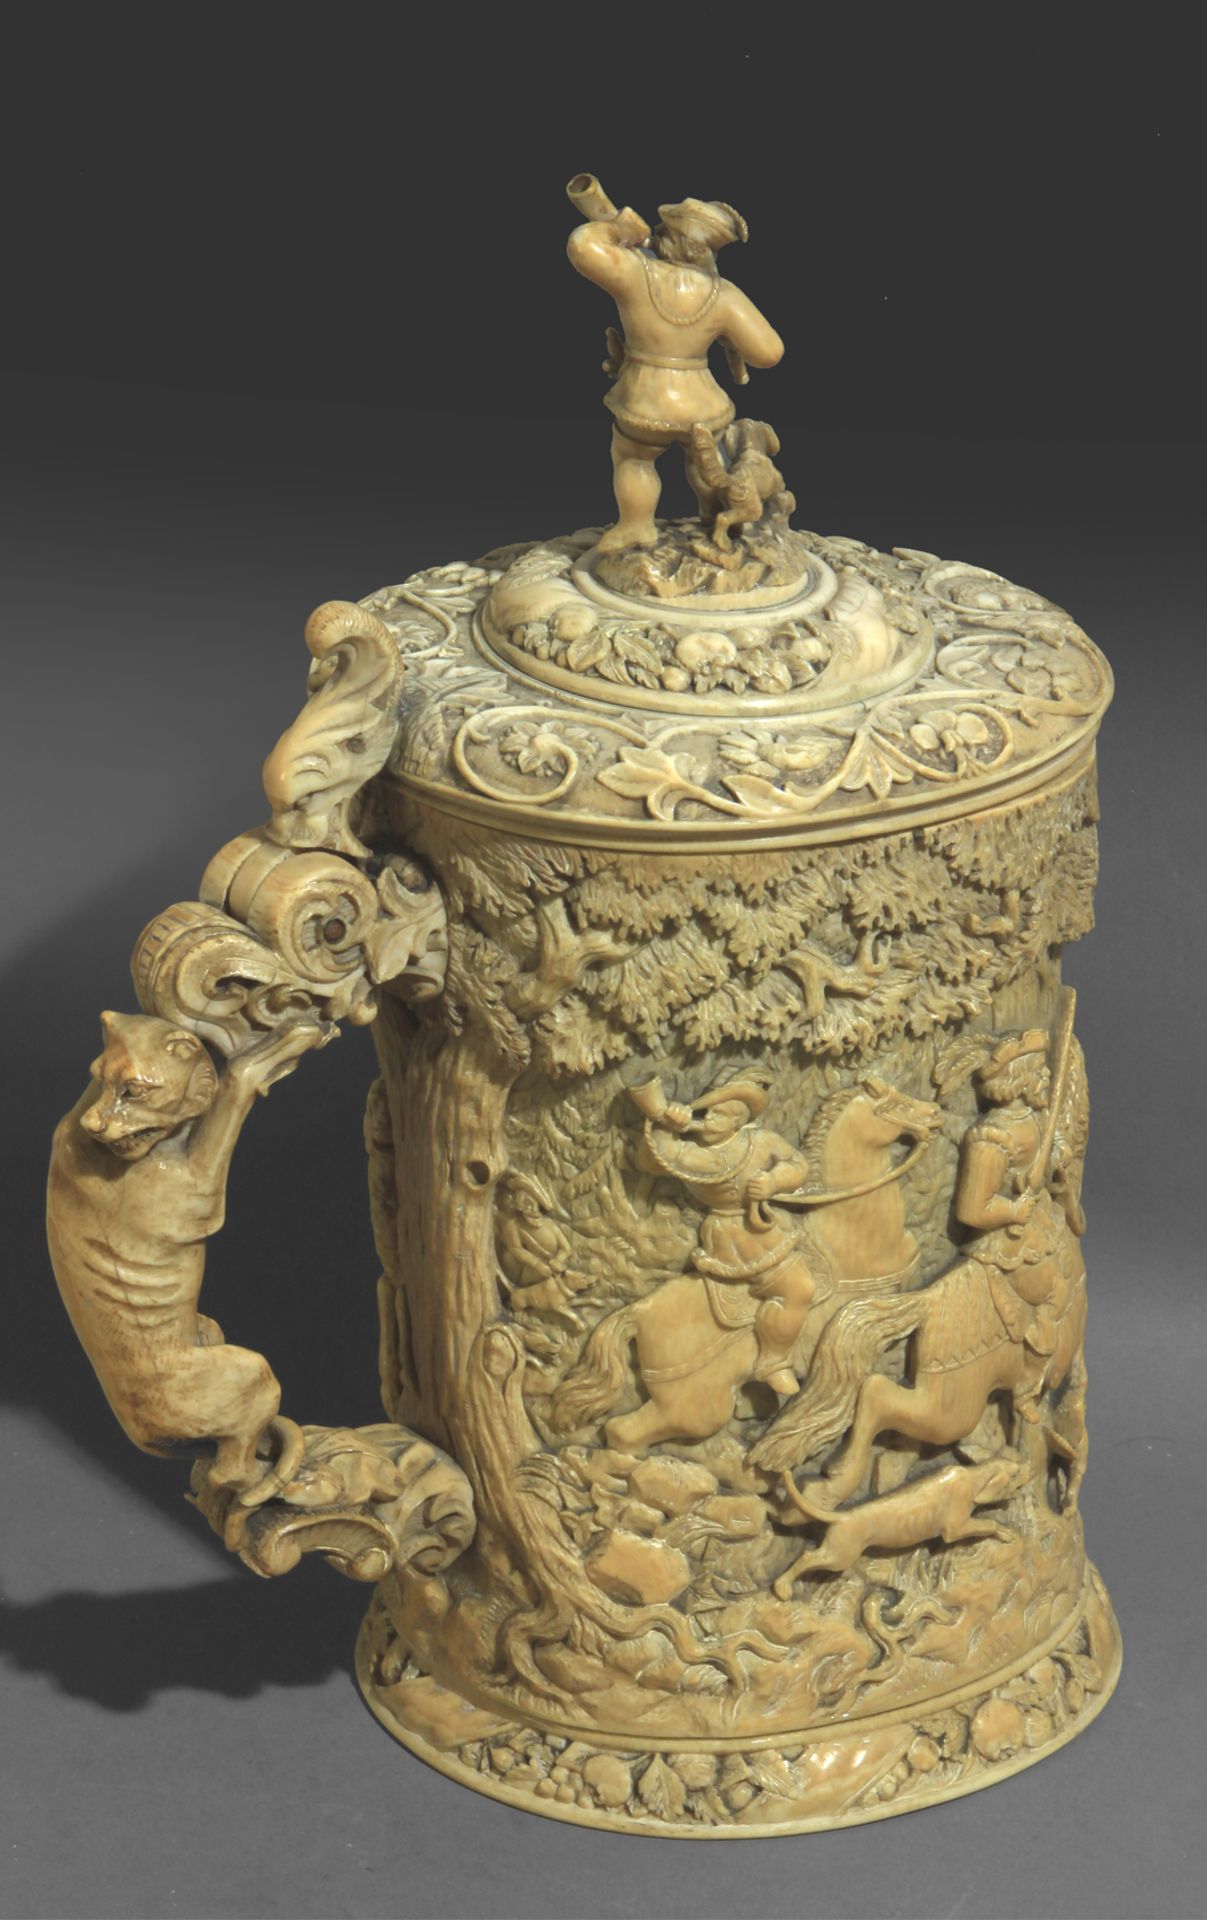 Early 18th century possibly German tankard - Image 4 of 14